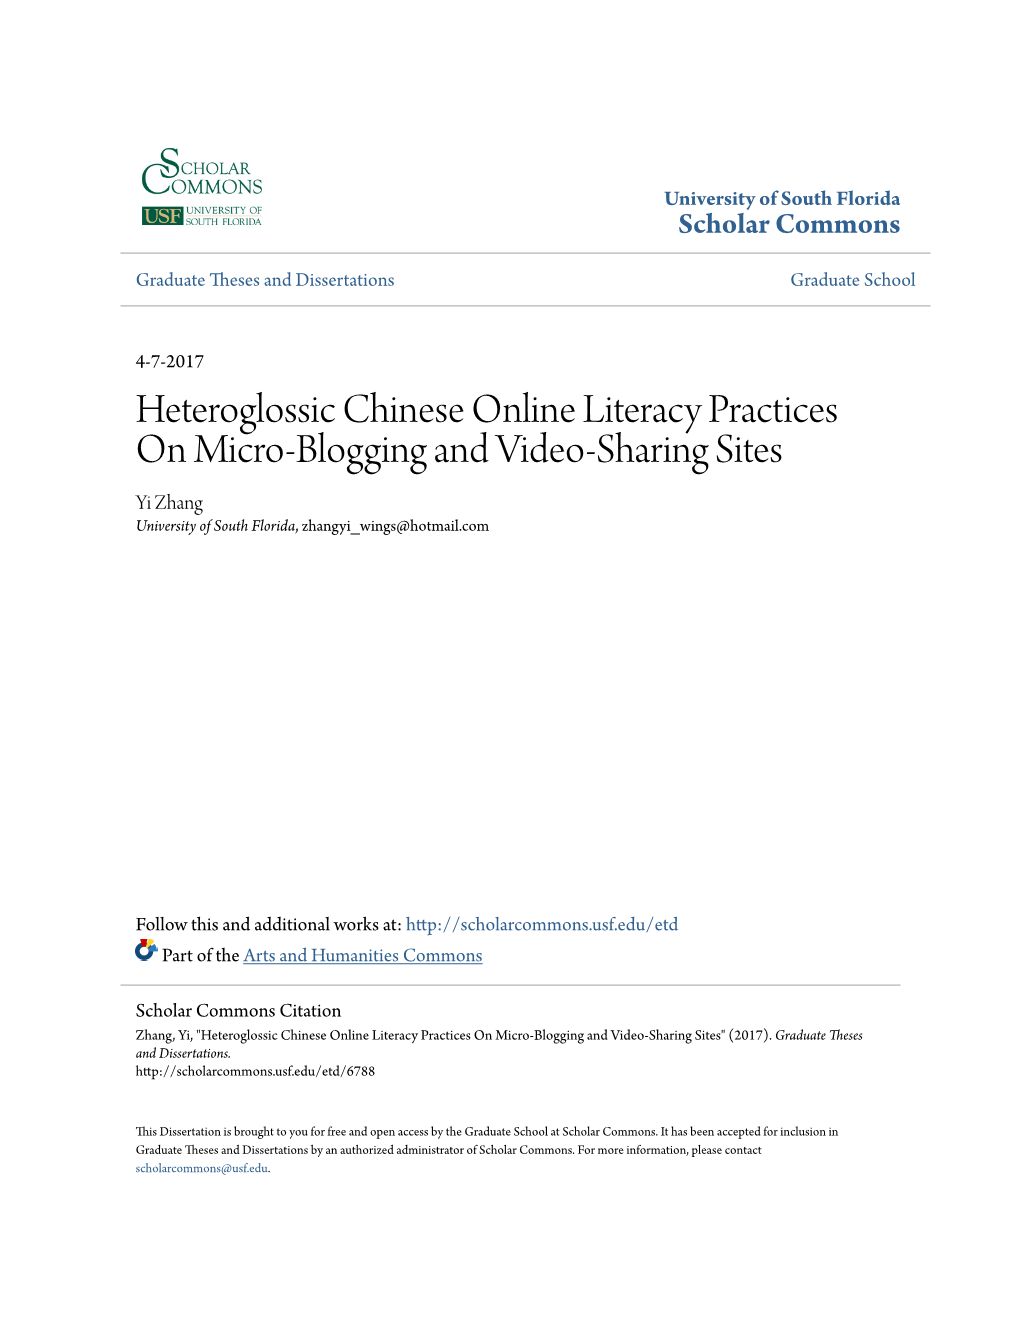 Heteroglossic Chinese Online Literacy Practices on Micro-Blogging and Video-Sharing Sites Yi Zhang University of South Florida, Zhangyi Wings@Hotmail.Com